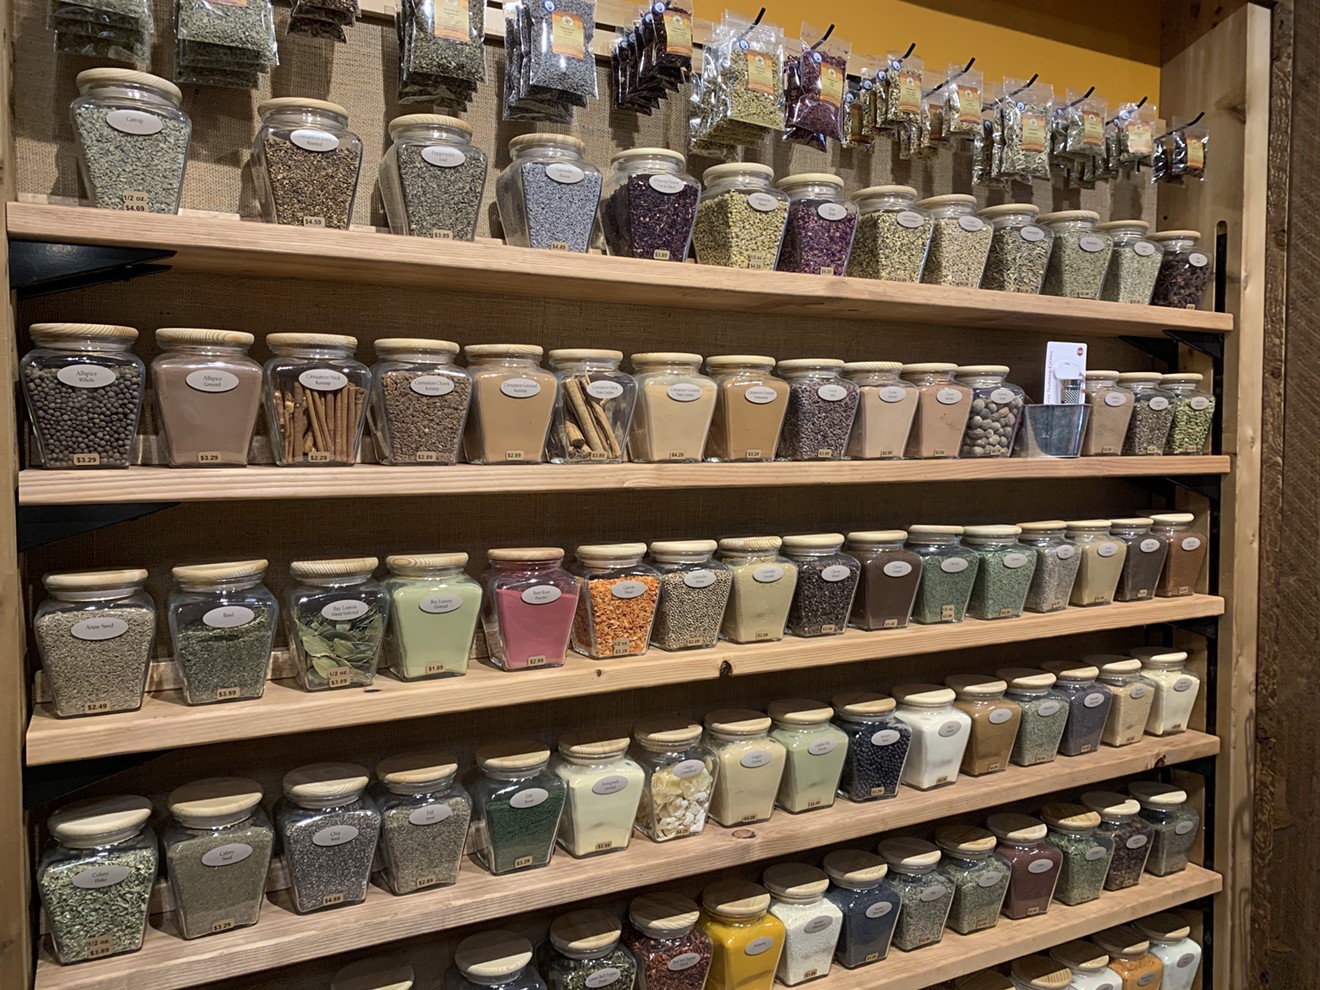 Walls and walls of blends at The Spice & Tea Exchange in Old Town Scottsdale.